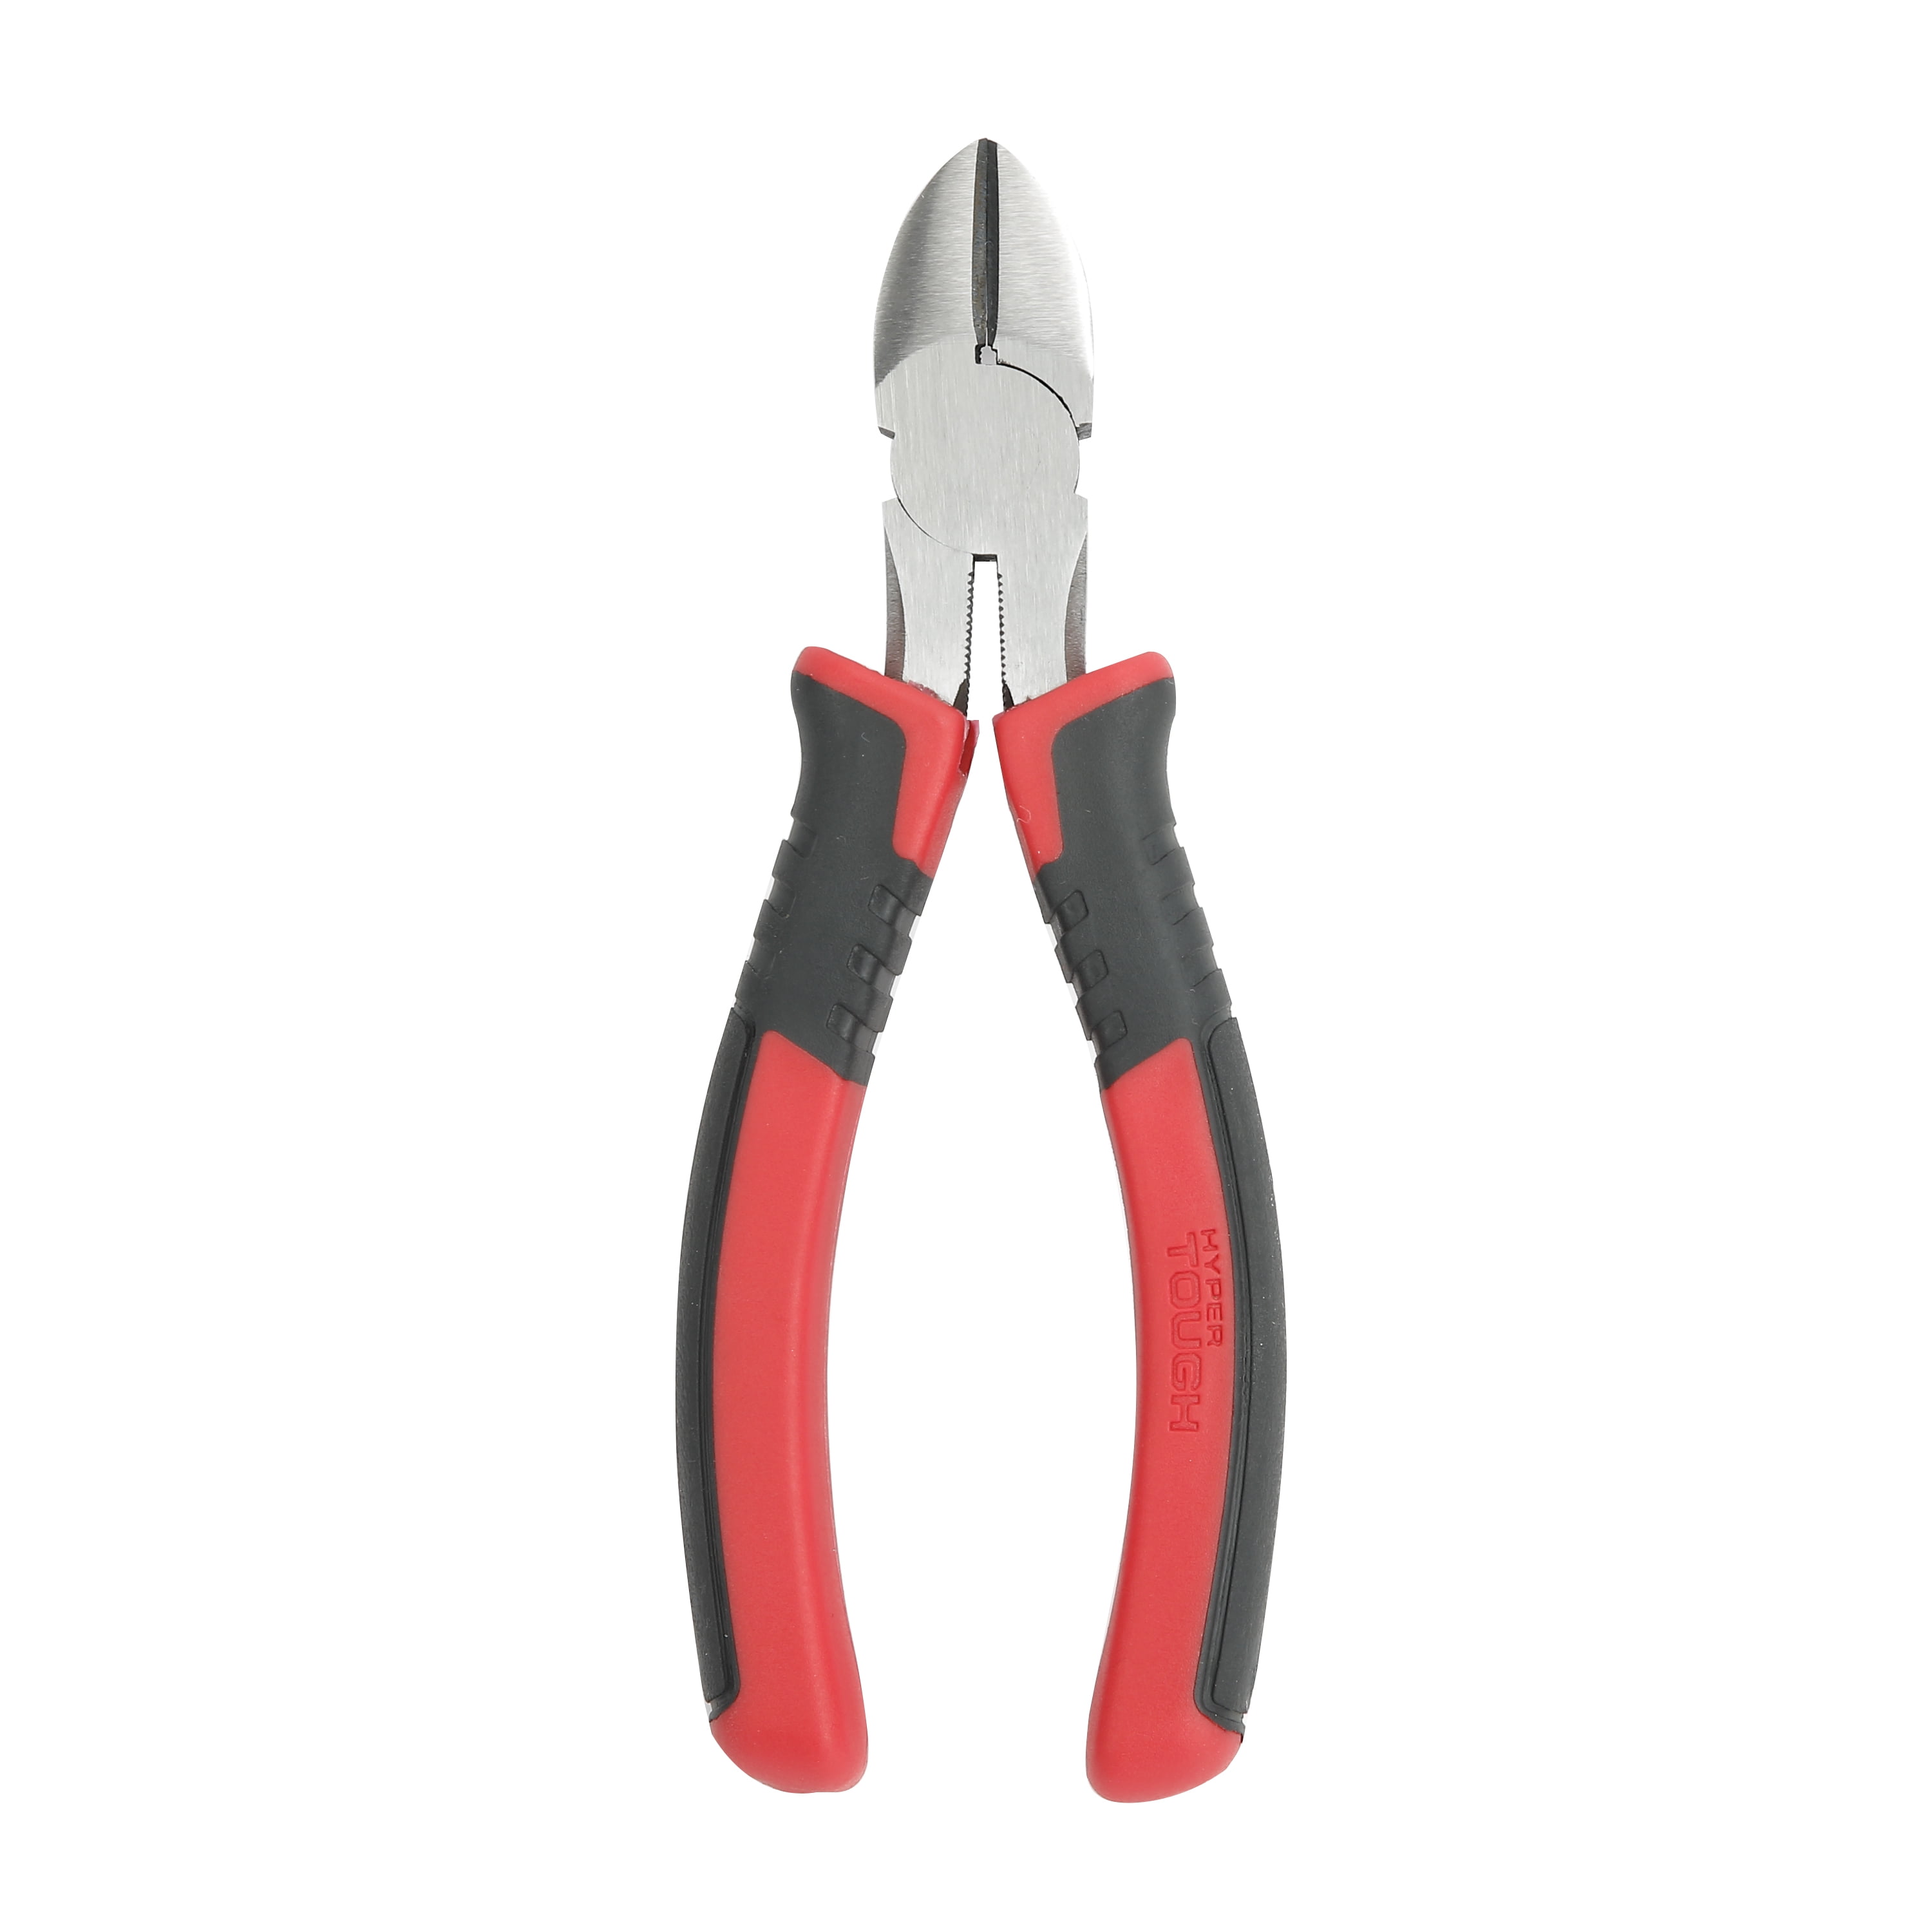 Cutting plier 6inch / Diagonal Side Wire Cutting Snip150mm / Wire Cutters  for Artificial Flowers/ Crafting, Heavy Duty Side Cutting Pliers MPT Brand